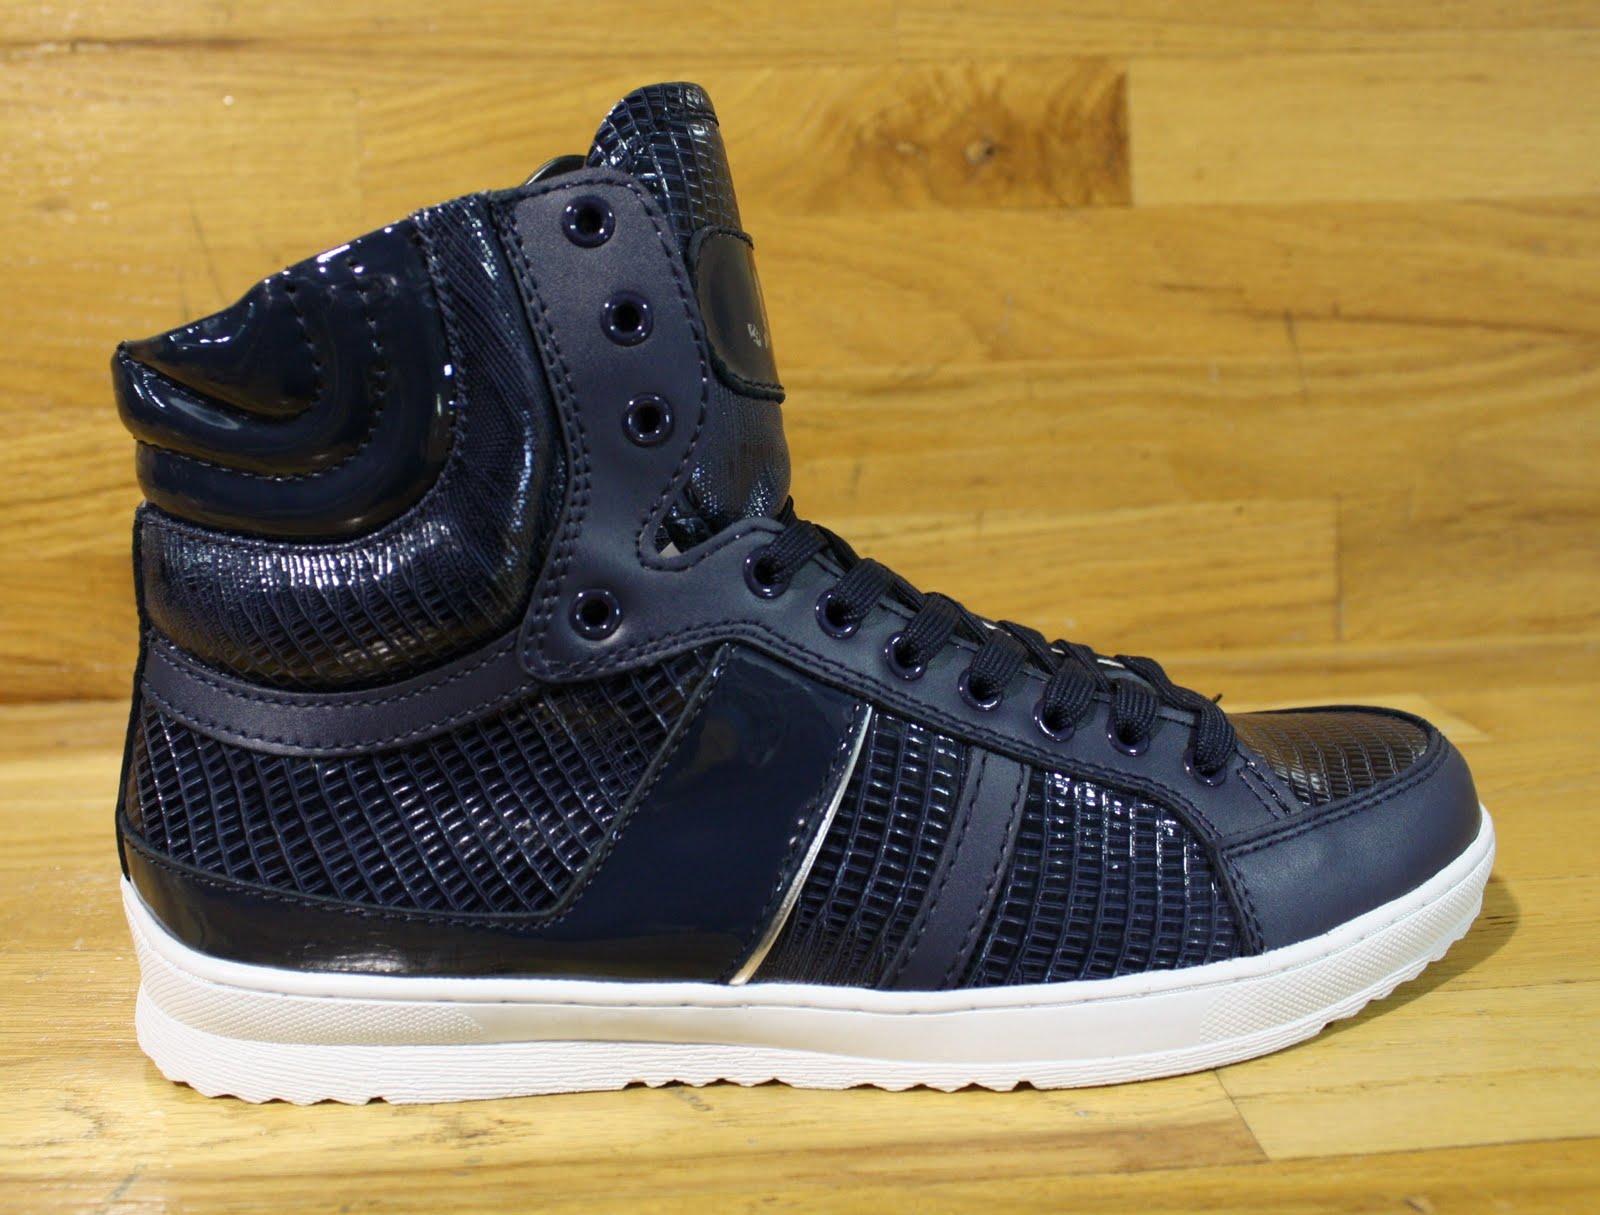 Dr. Jays Stores: New J75 Footwear in our Dr .Jays Stores check it out!!!